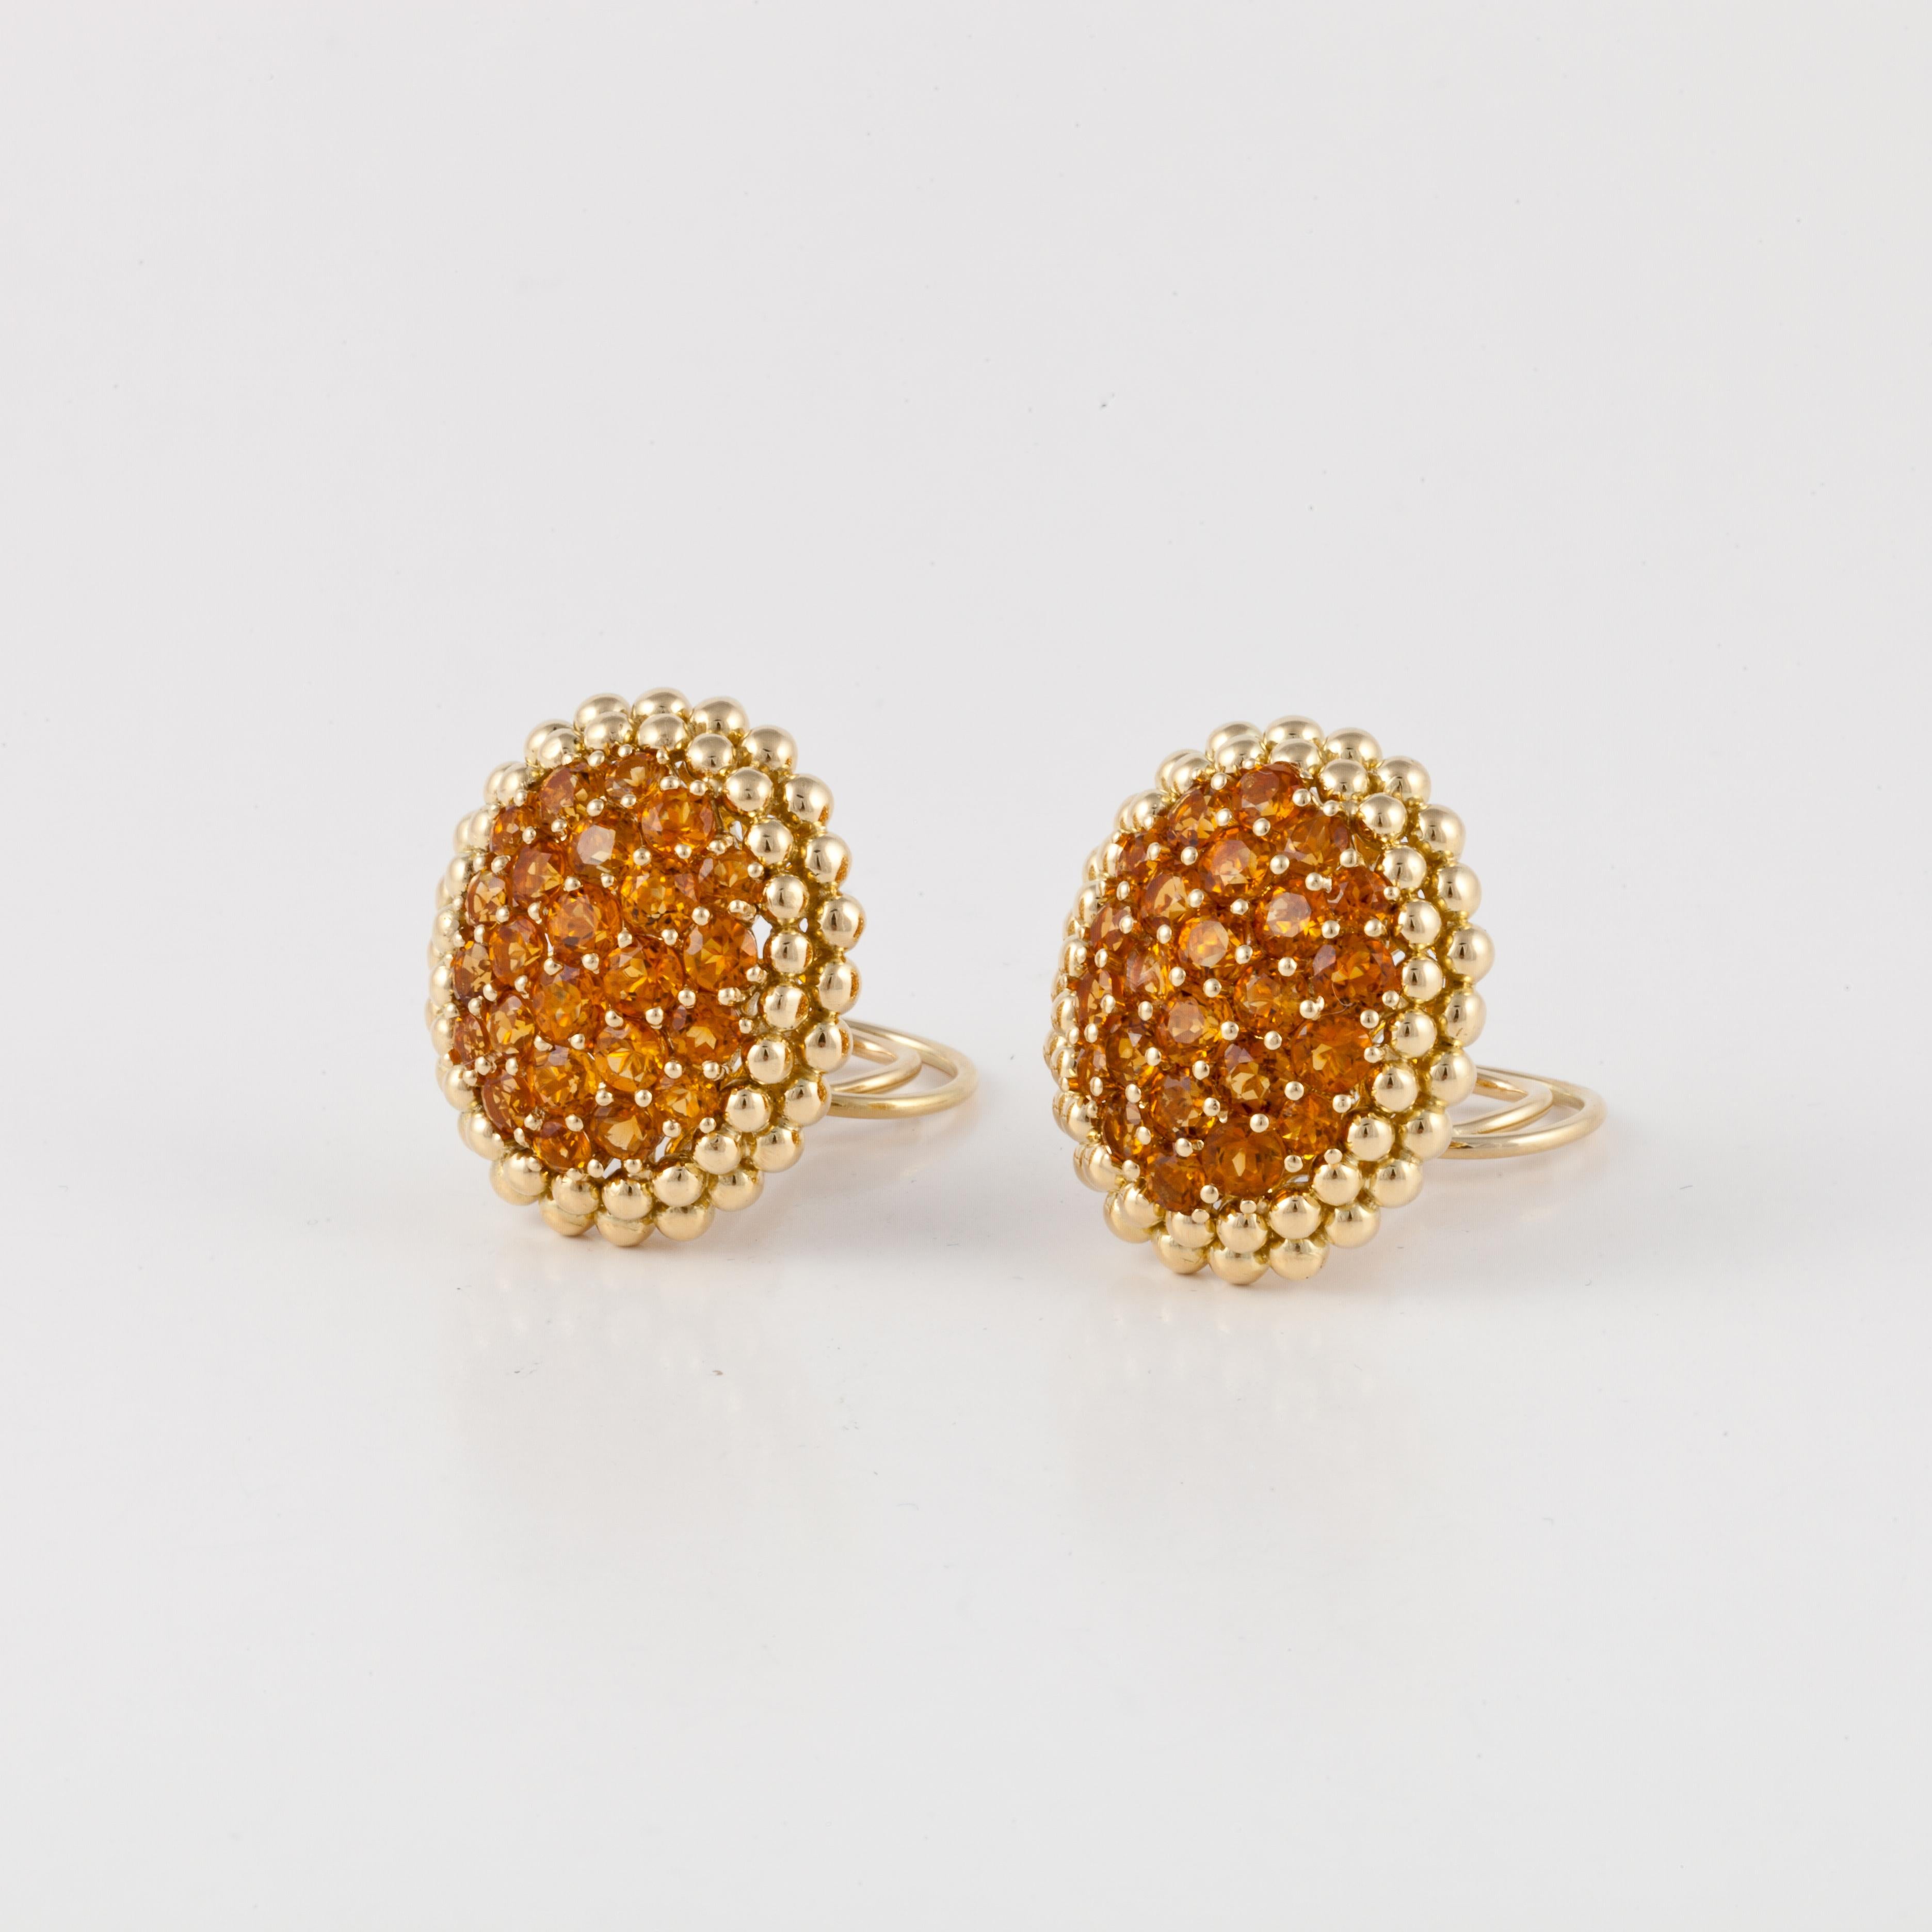 18K yellow gold citrine cluster earrings by Gioeil Moda.  The earrings feature 50 prong-set round citrine stones with a double frame of gold beads.  They measure 1 1/8 inches by 7/8 inches.  Clip-on style. 